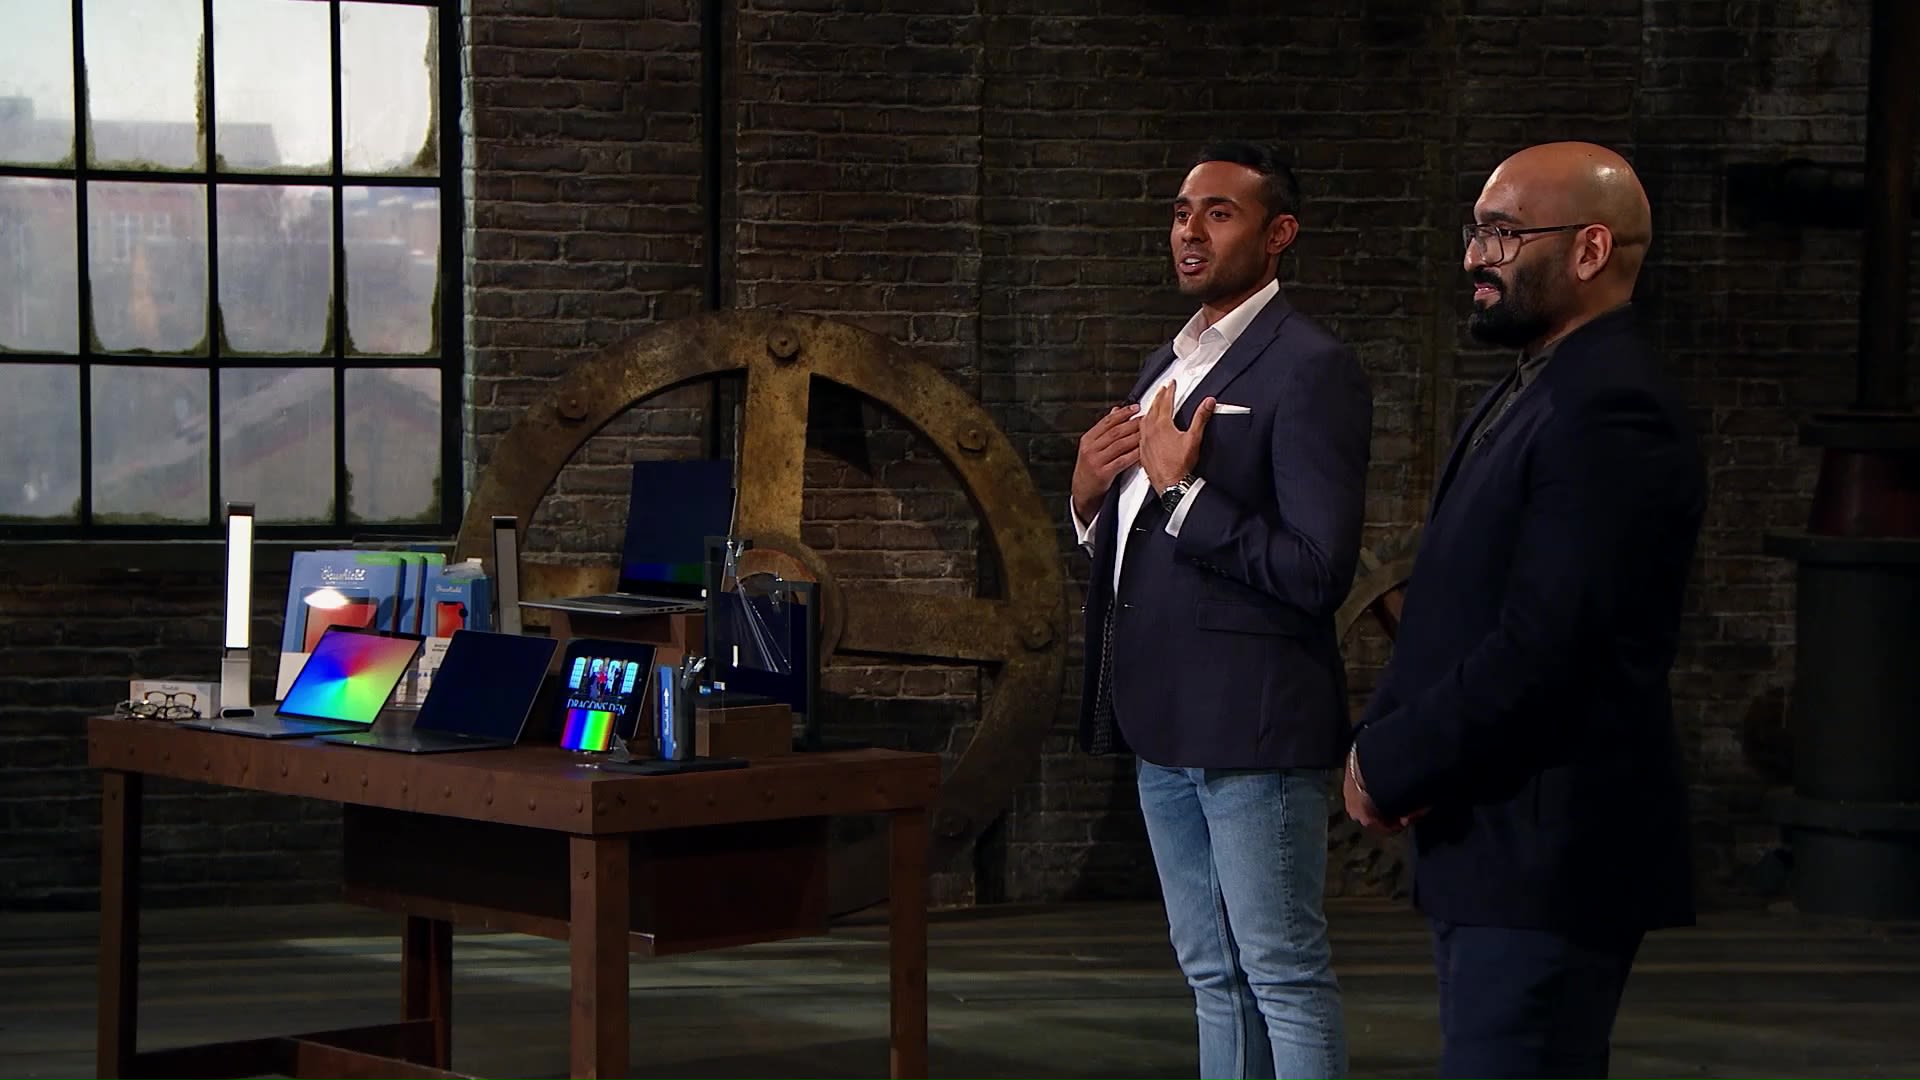 Dhruvin Patel pitching Ocushield on an episode of Dragons' Den